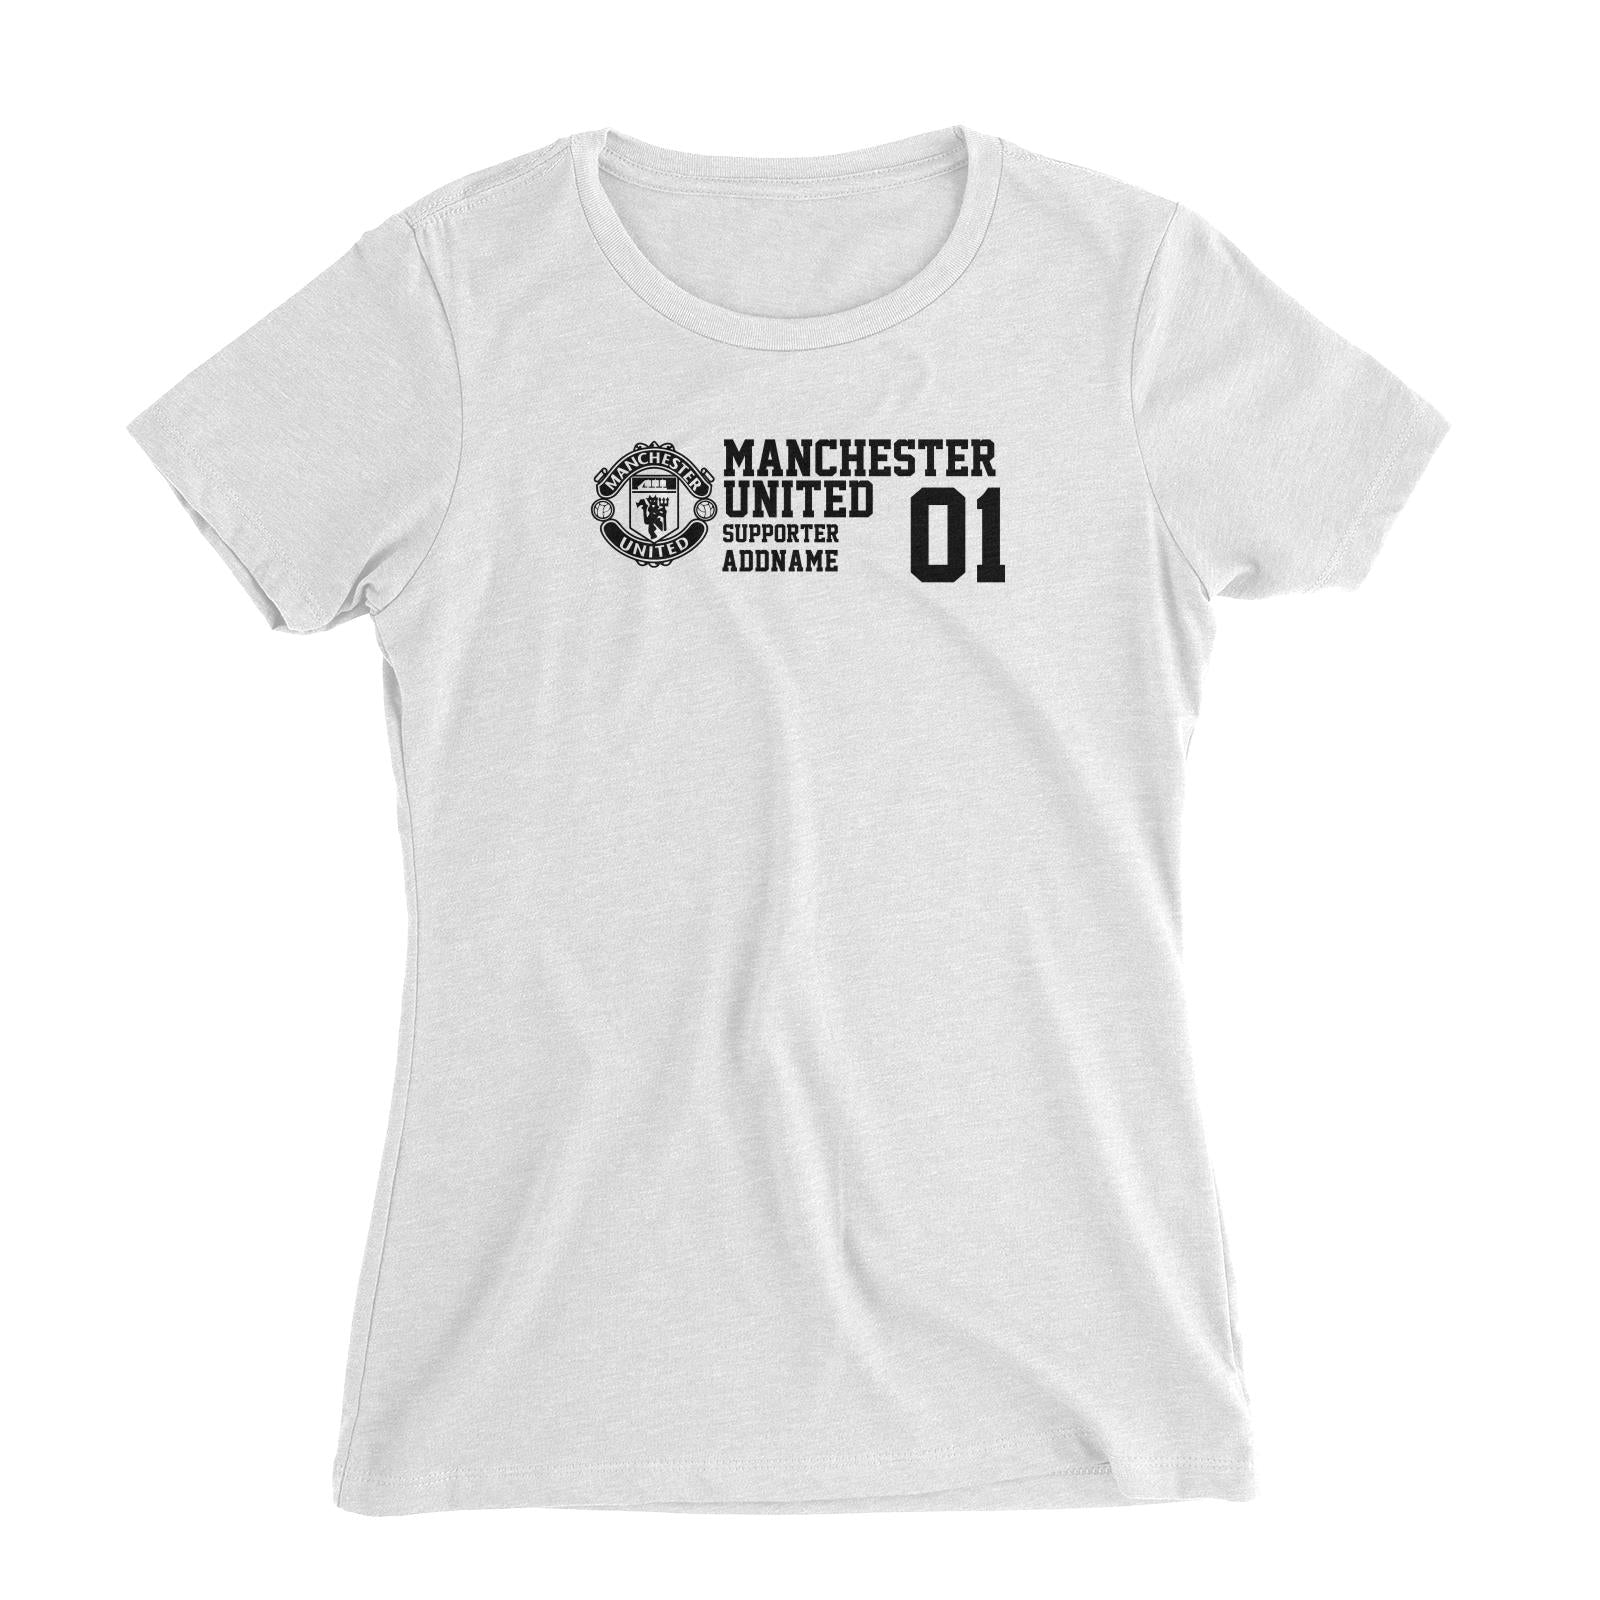 Manchester United Football Supporter Addname Women Slim Fit T-Shirt